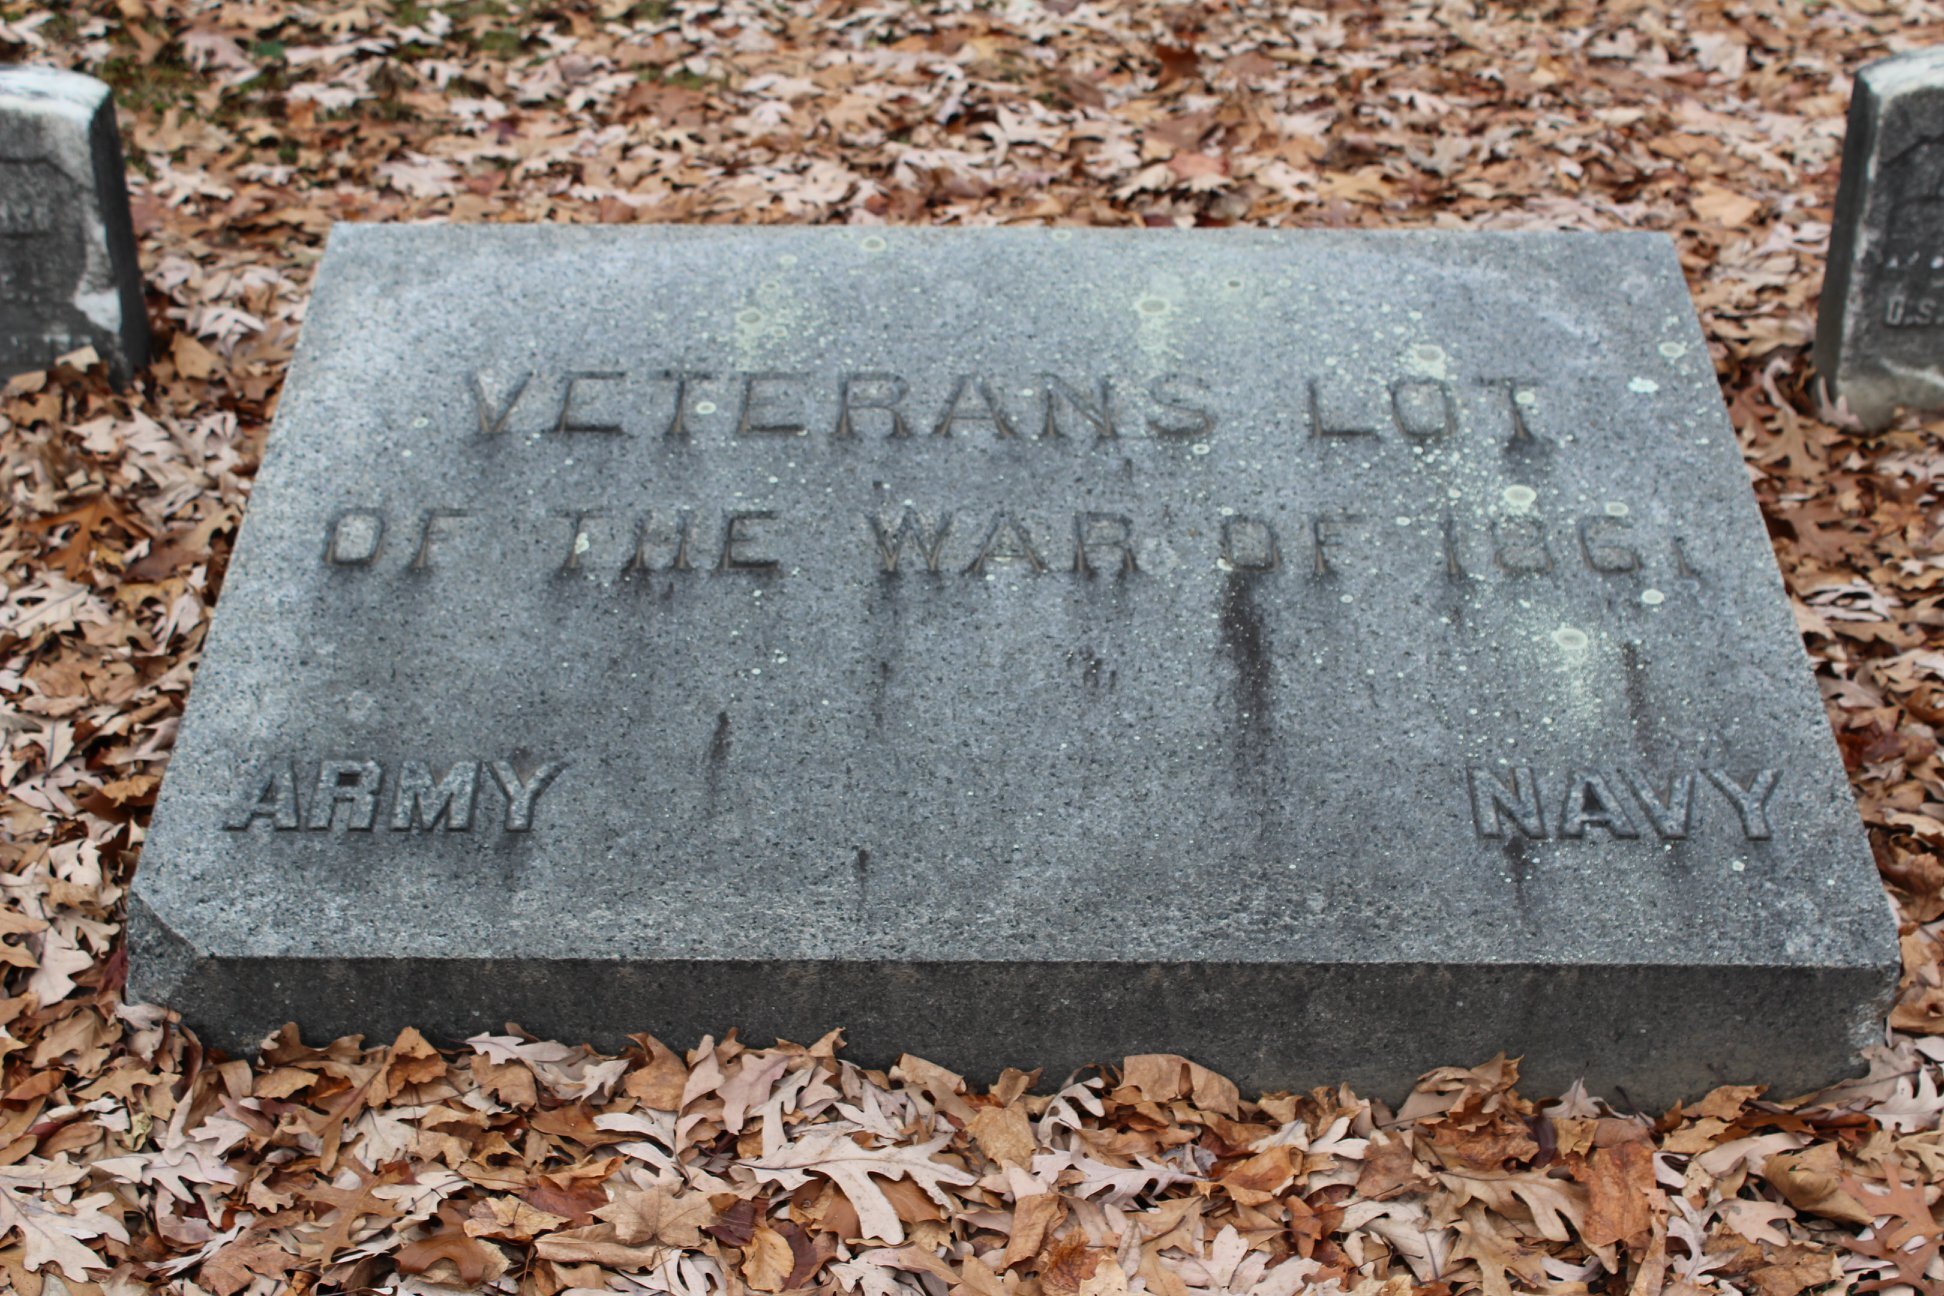 Granite grave in the ground with the text Veterans Lot of the War of 1861.